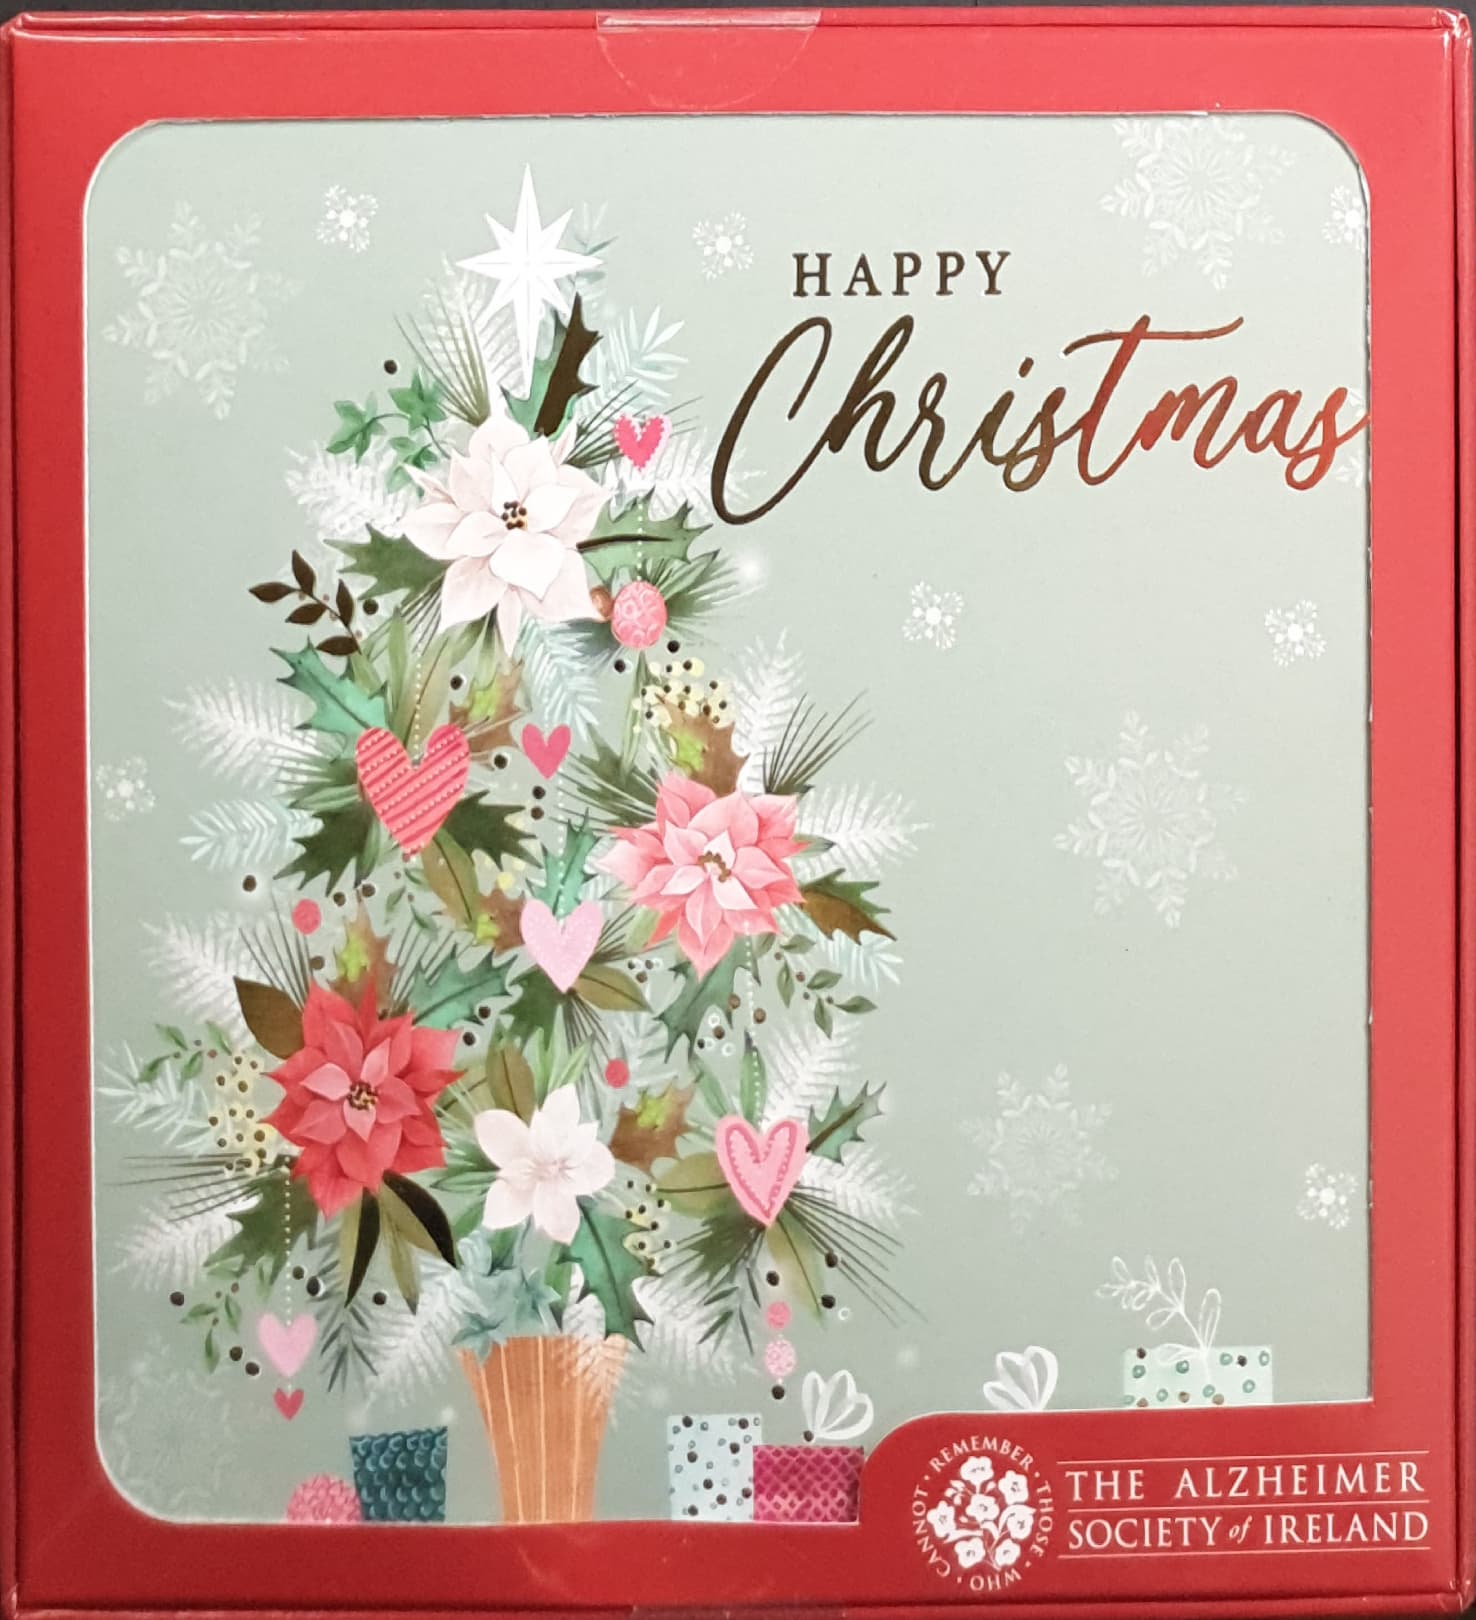 Charity Christmas Card (In Irish & English) - Box of 16 / Alzheimer Society of Ireland - Pink & Red Floral Tree